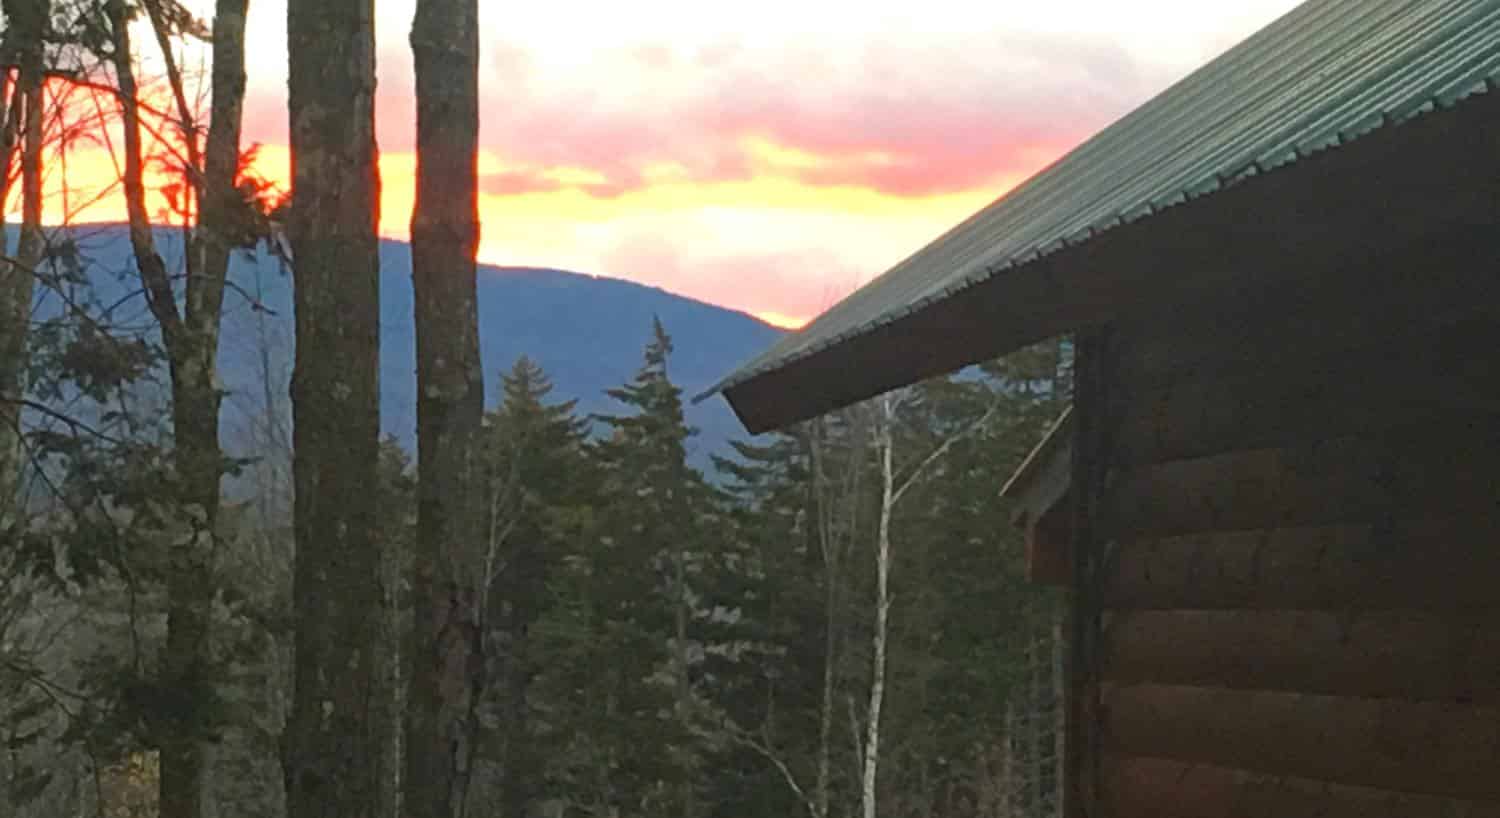 View from the side of a cabin of the sunset sky over distant hills and pine trees